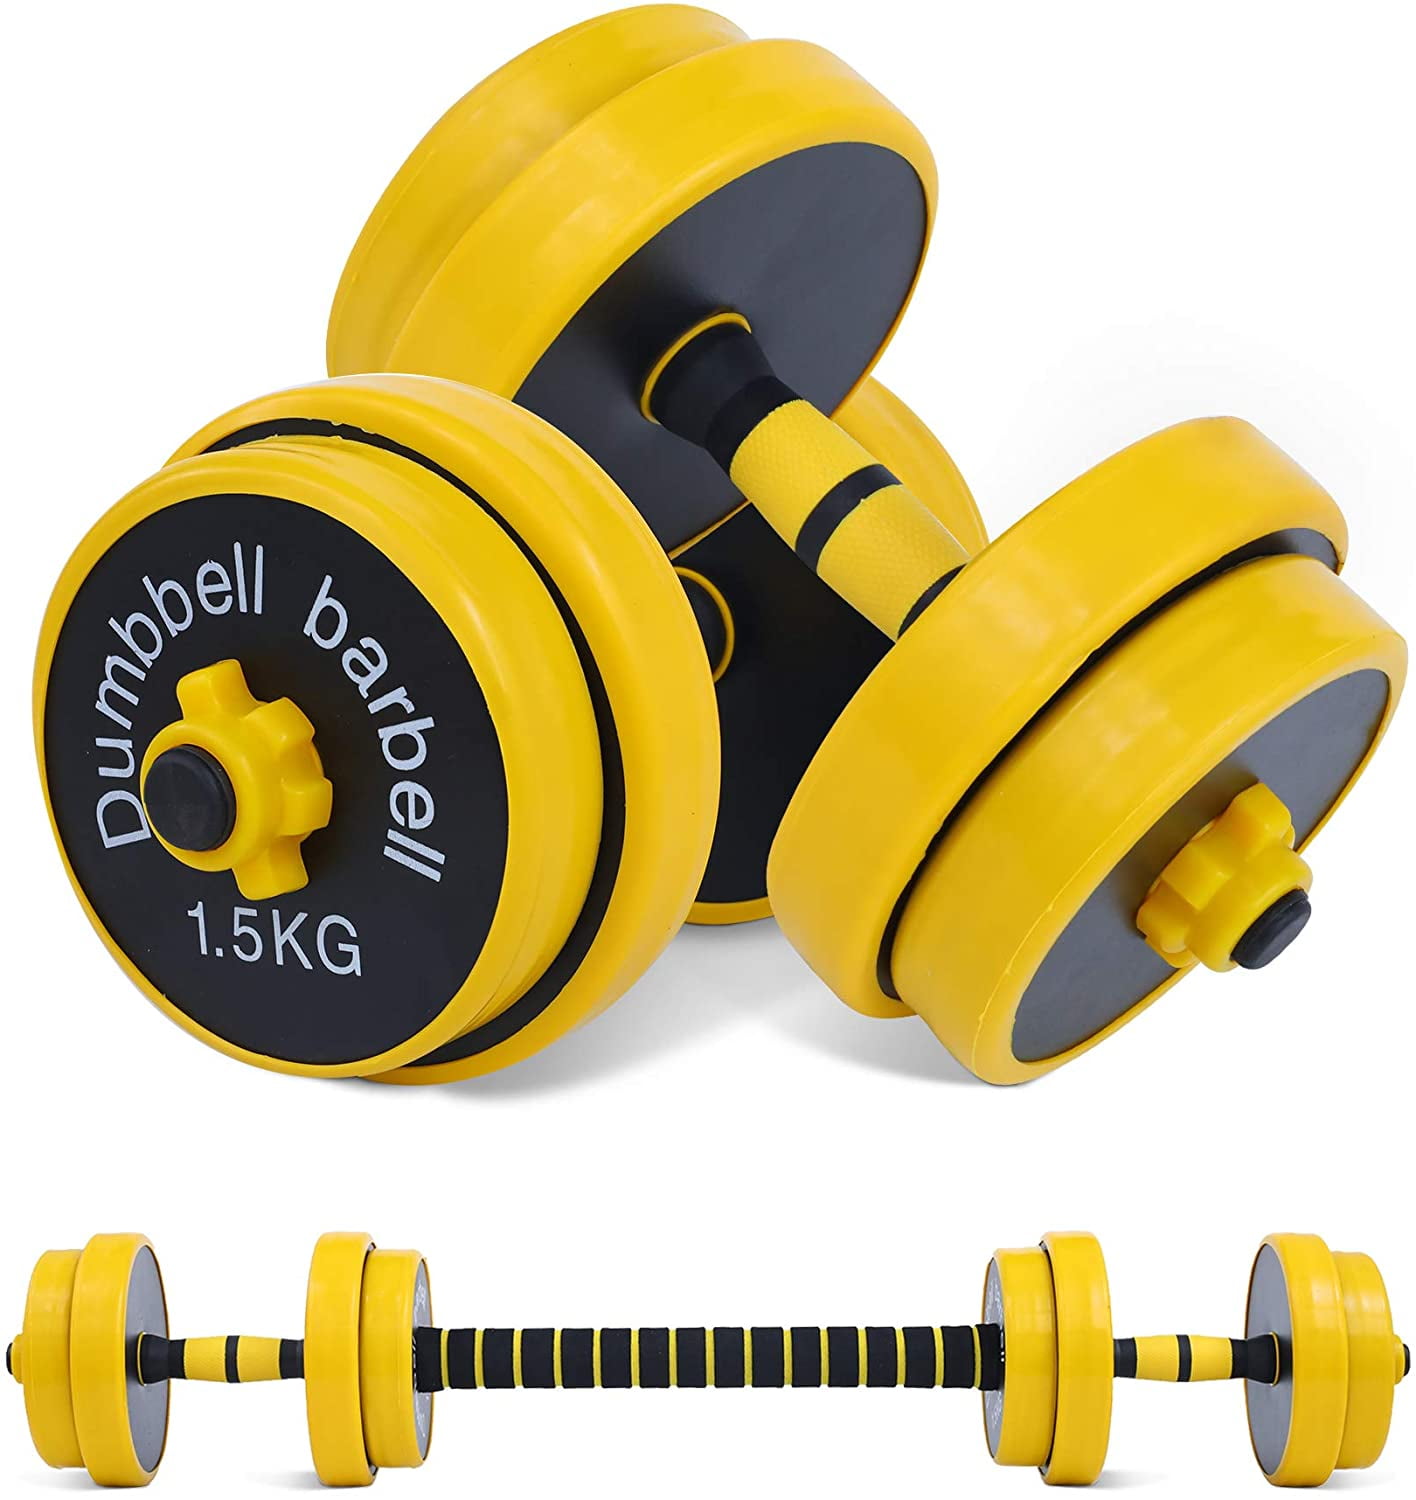 Details about   New Style Adjustable Dumbbell Barbell Kit Weight to 66LB Home Gym Workout 